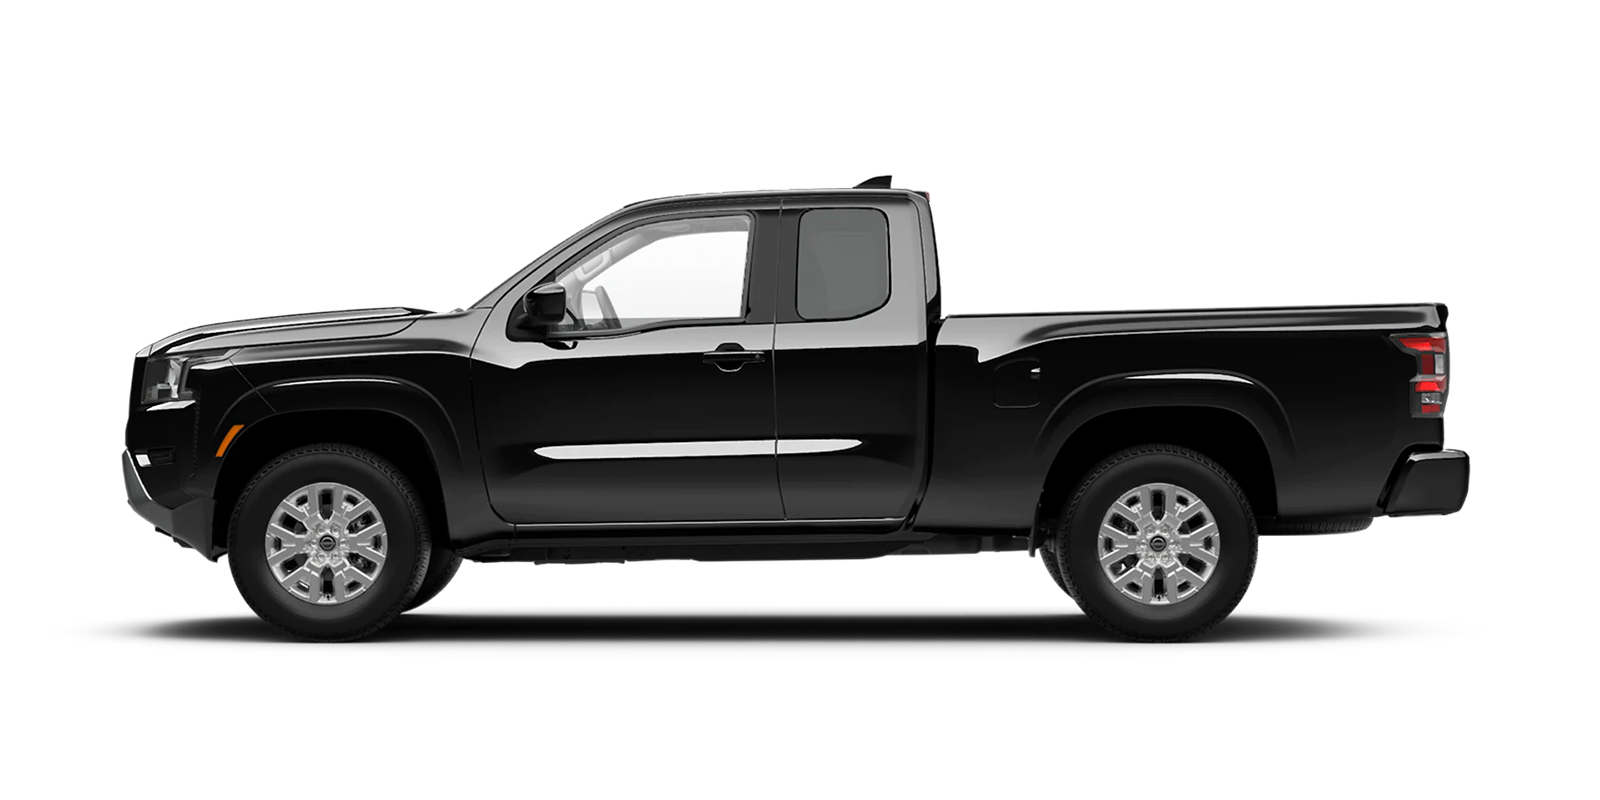 2022 Frontier King Cab SV 4x4 in Super Black | Nationwide Nissan in Timonium MD